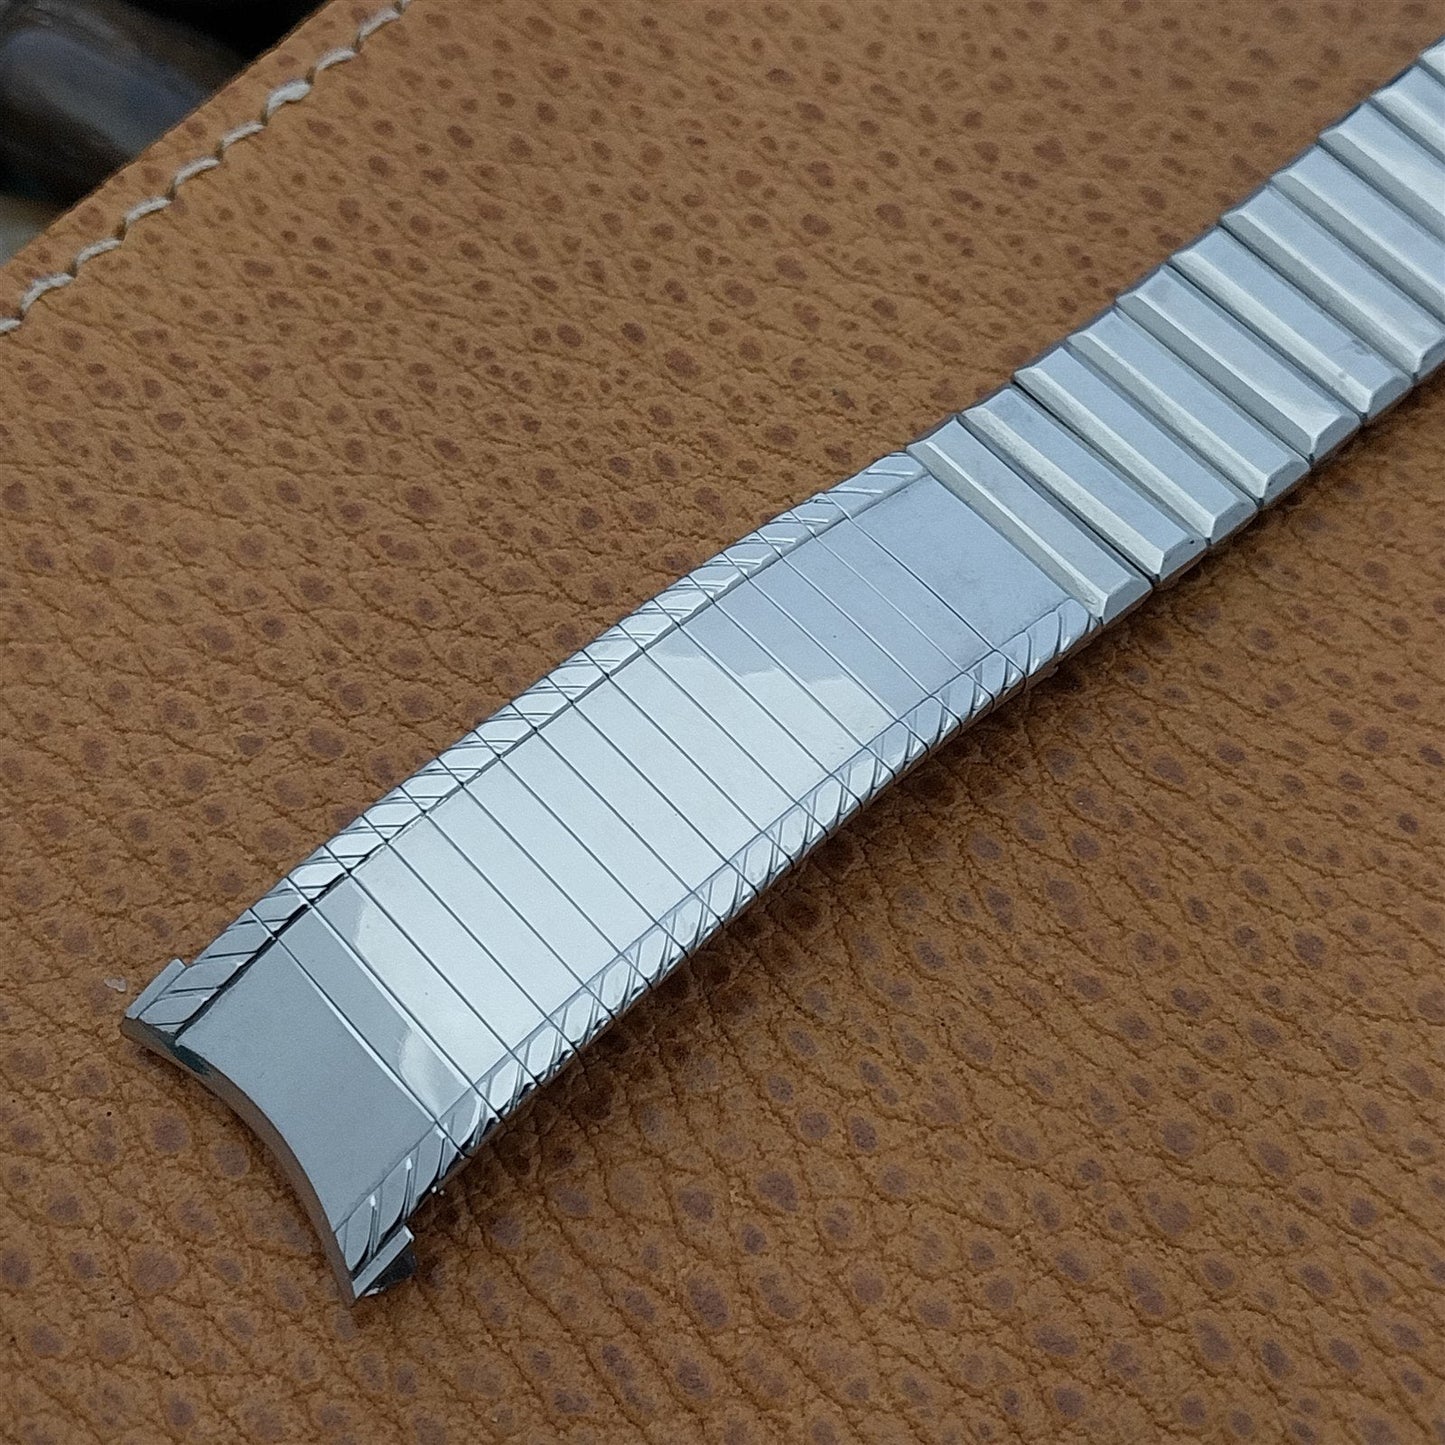 18mm 19mm Kreisler USA Stainless Steel nos Classic 1960s Vintage Watch Band